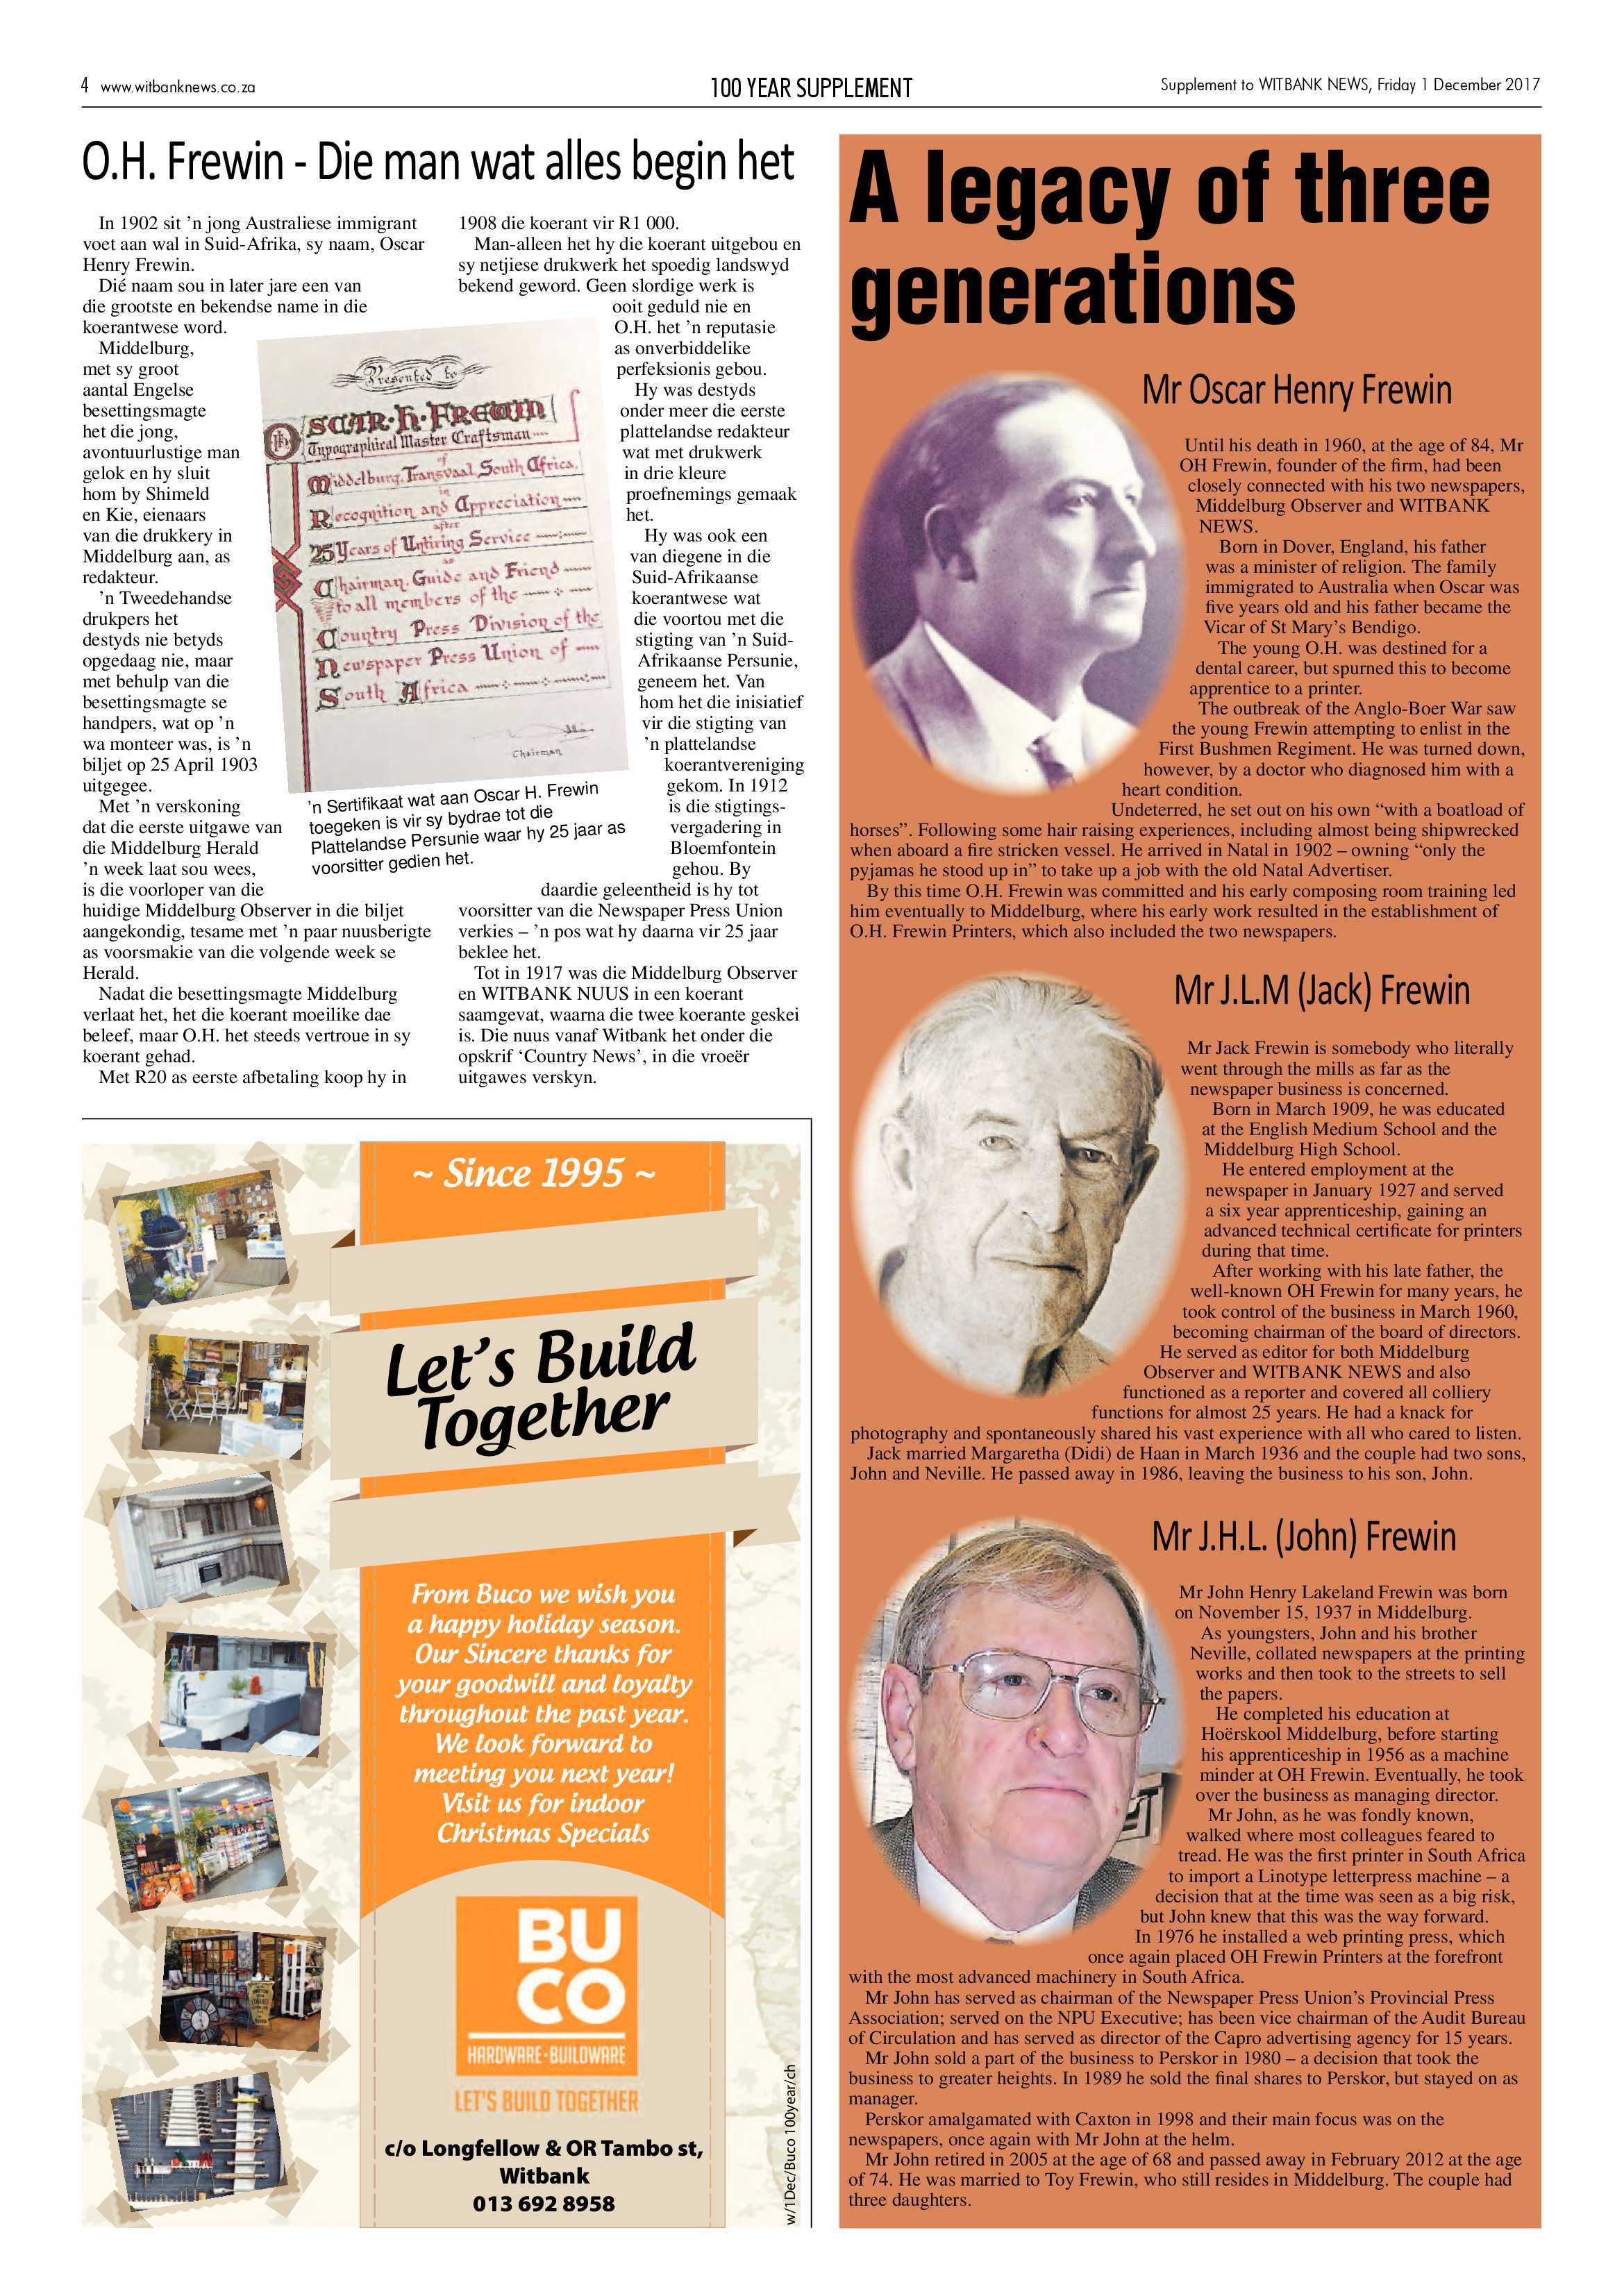 Witbank News 100 Year Supplement page 4